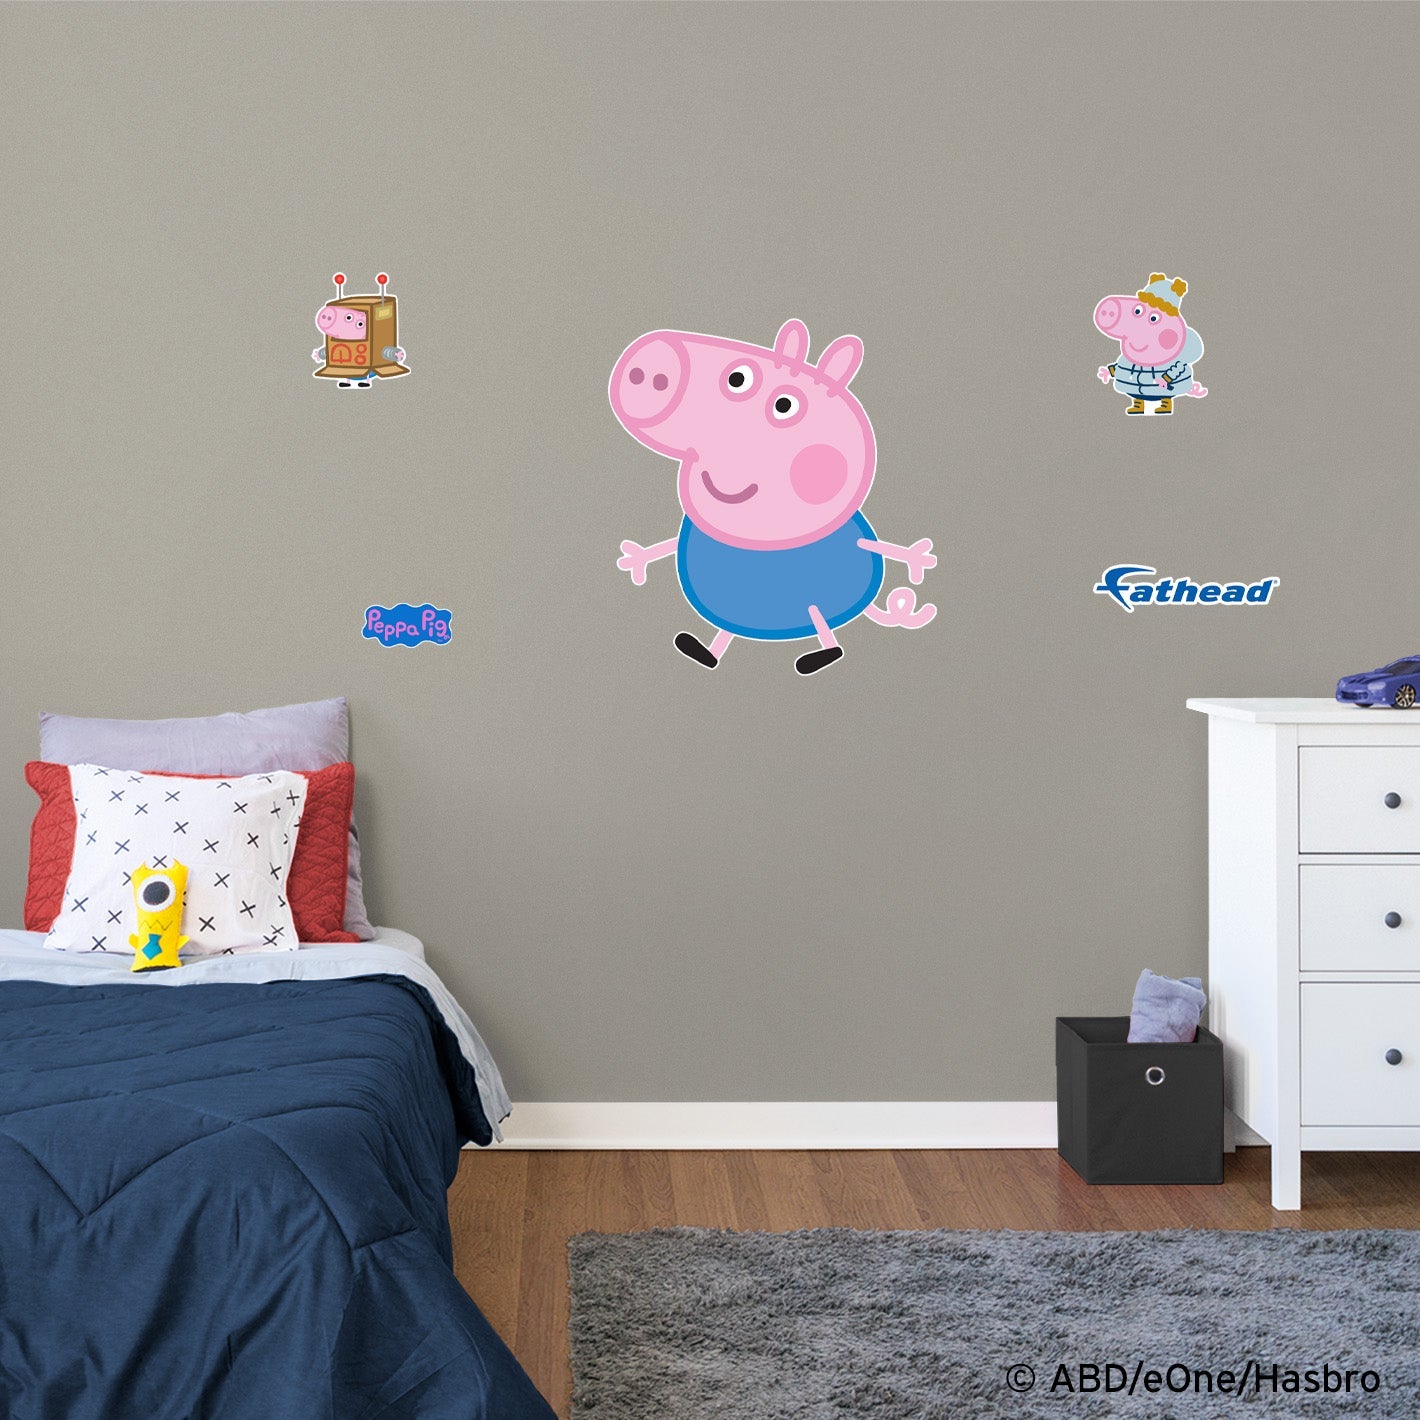 Peppa Pig: George RealBigs - Officially Licensed Hasbro Removable Adhesive Decal